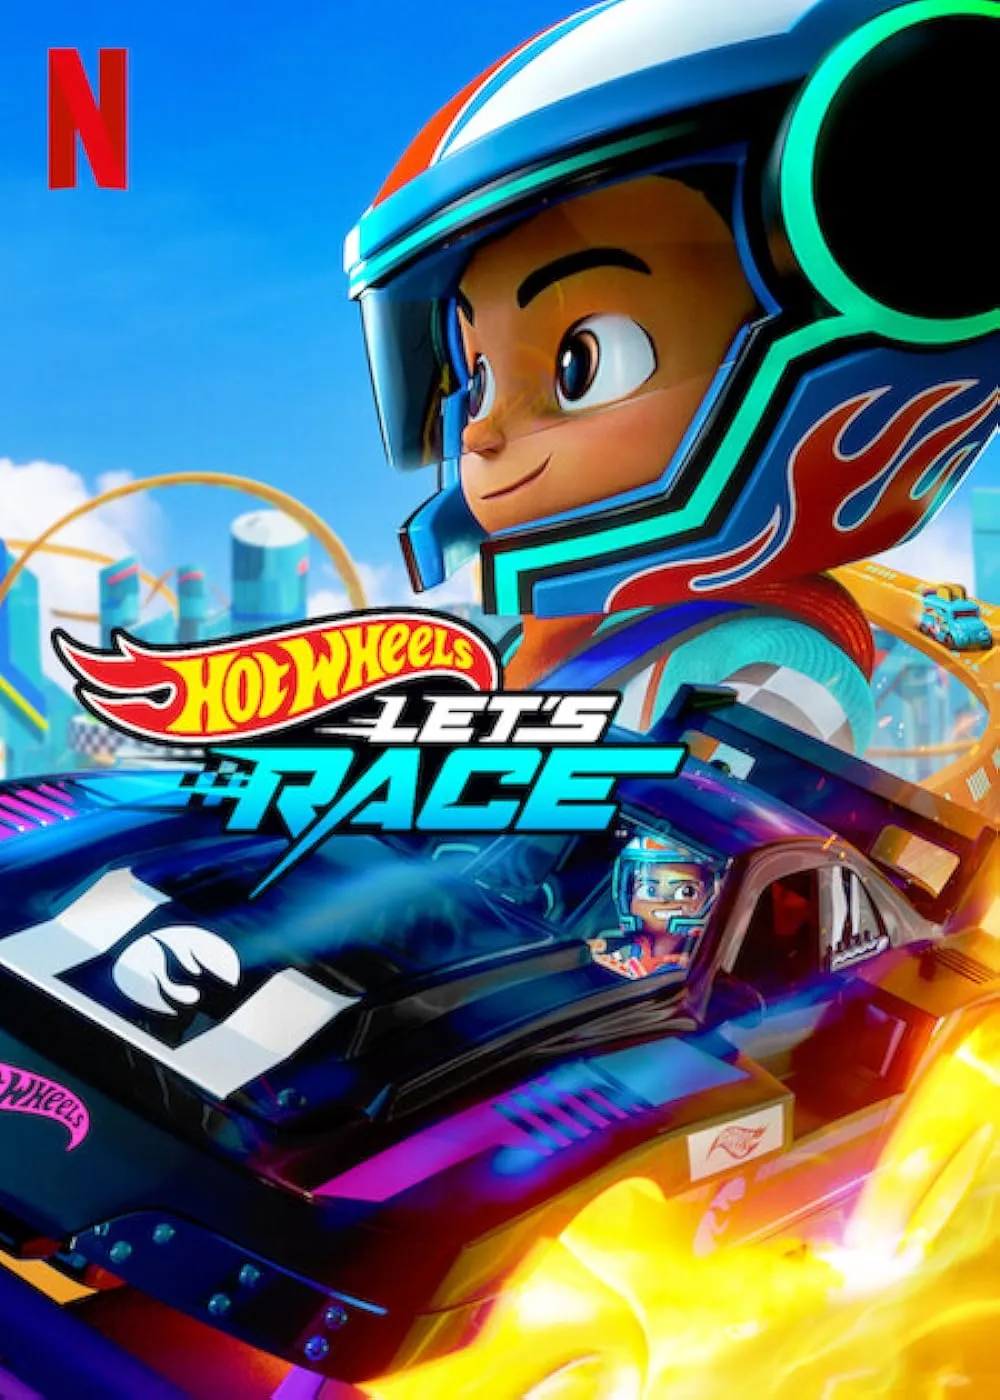 Hot Wheels Lets Race 2024 S01 Complete Hindi ORG Dual Audio 1080p | 720p | 480p HDRip 